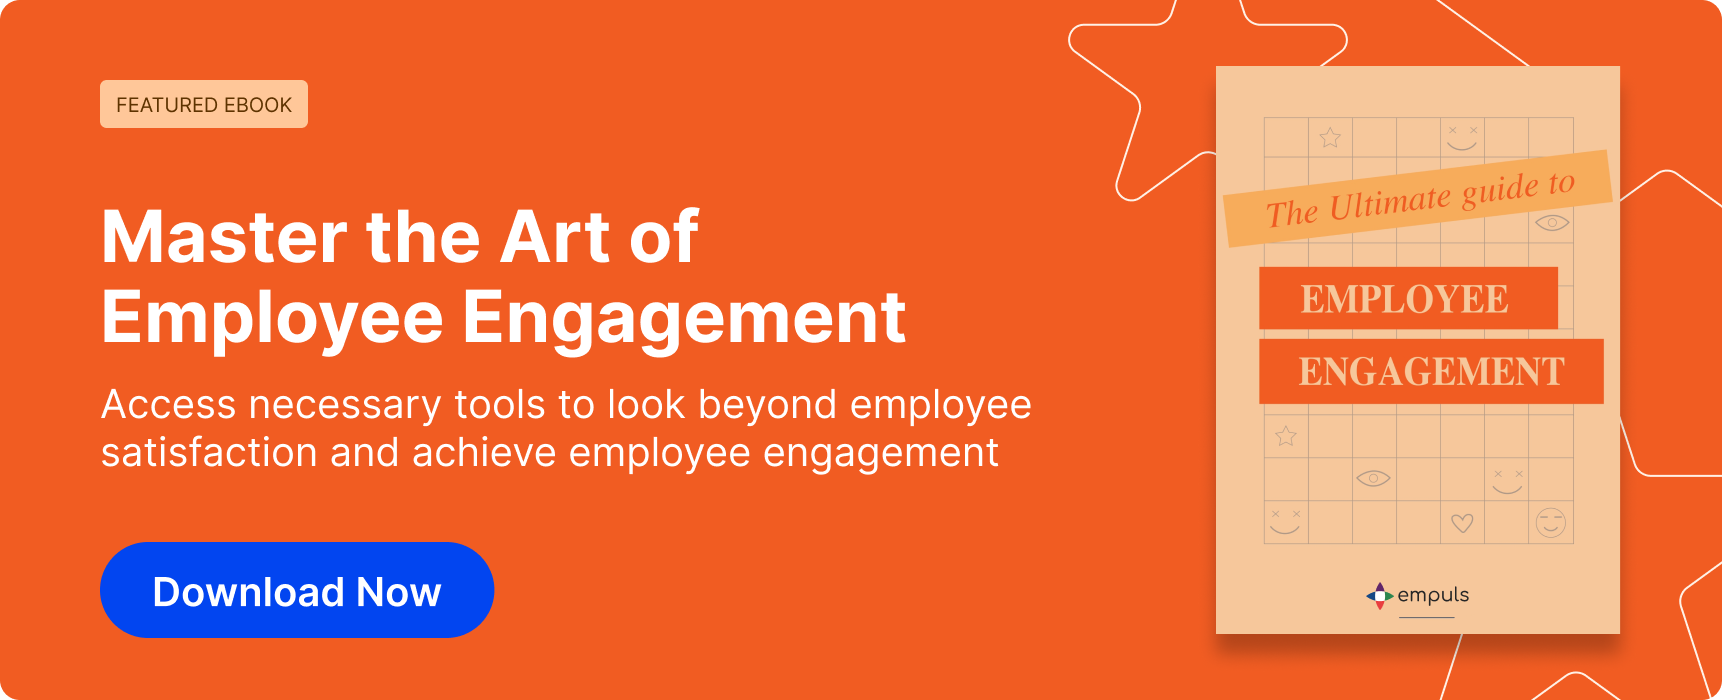 The Ultimate Guide to Employee Engagement	